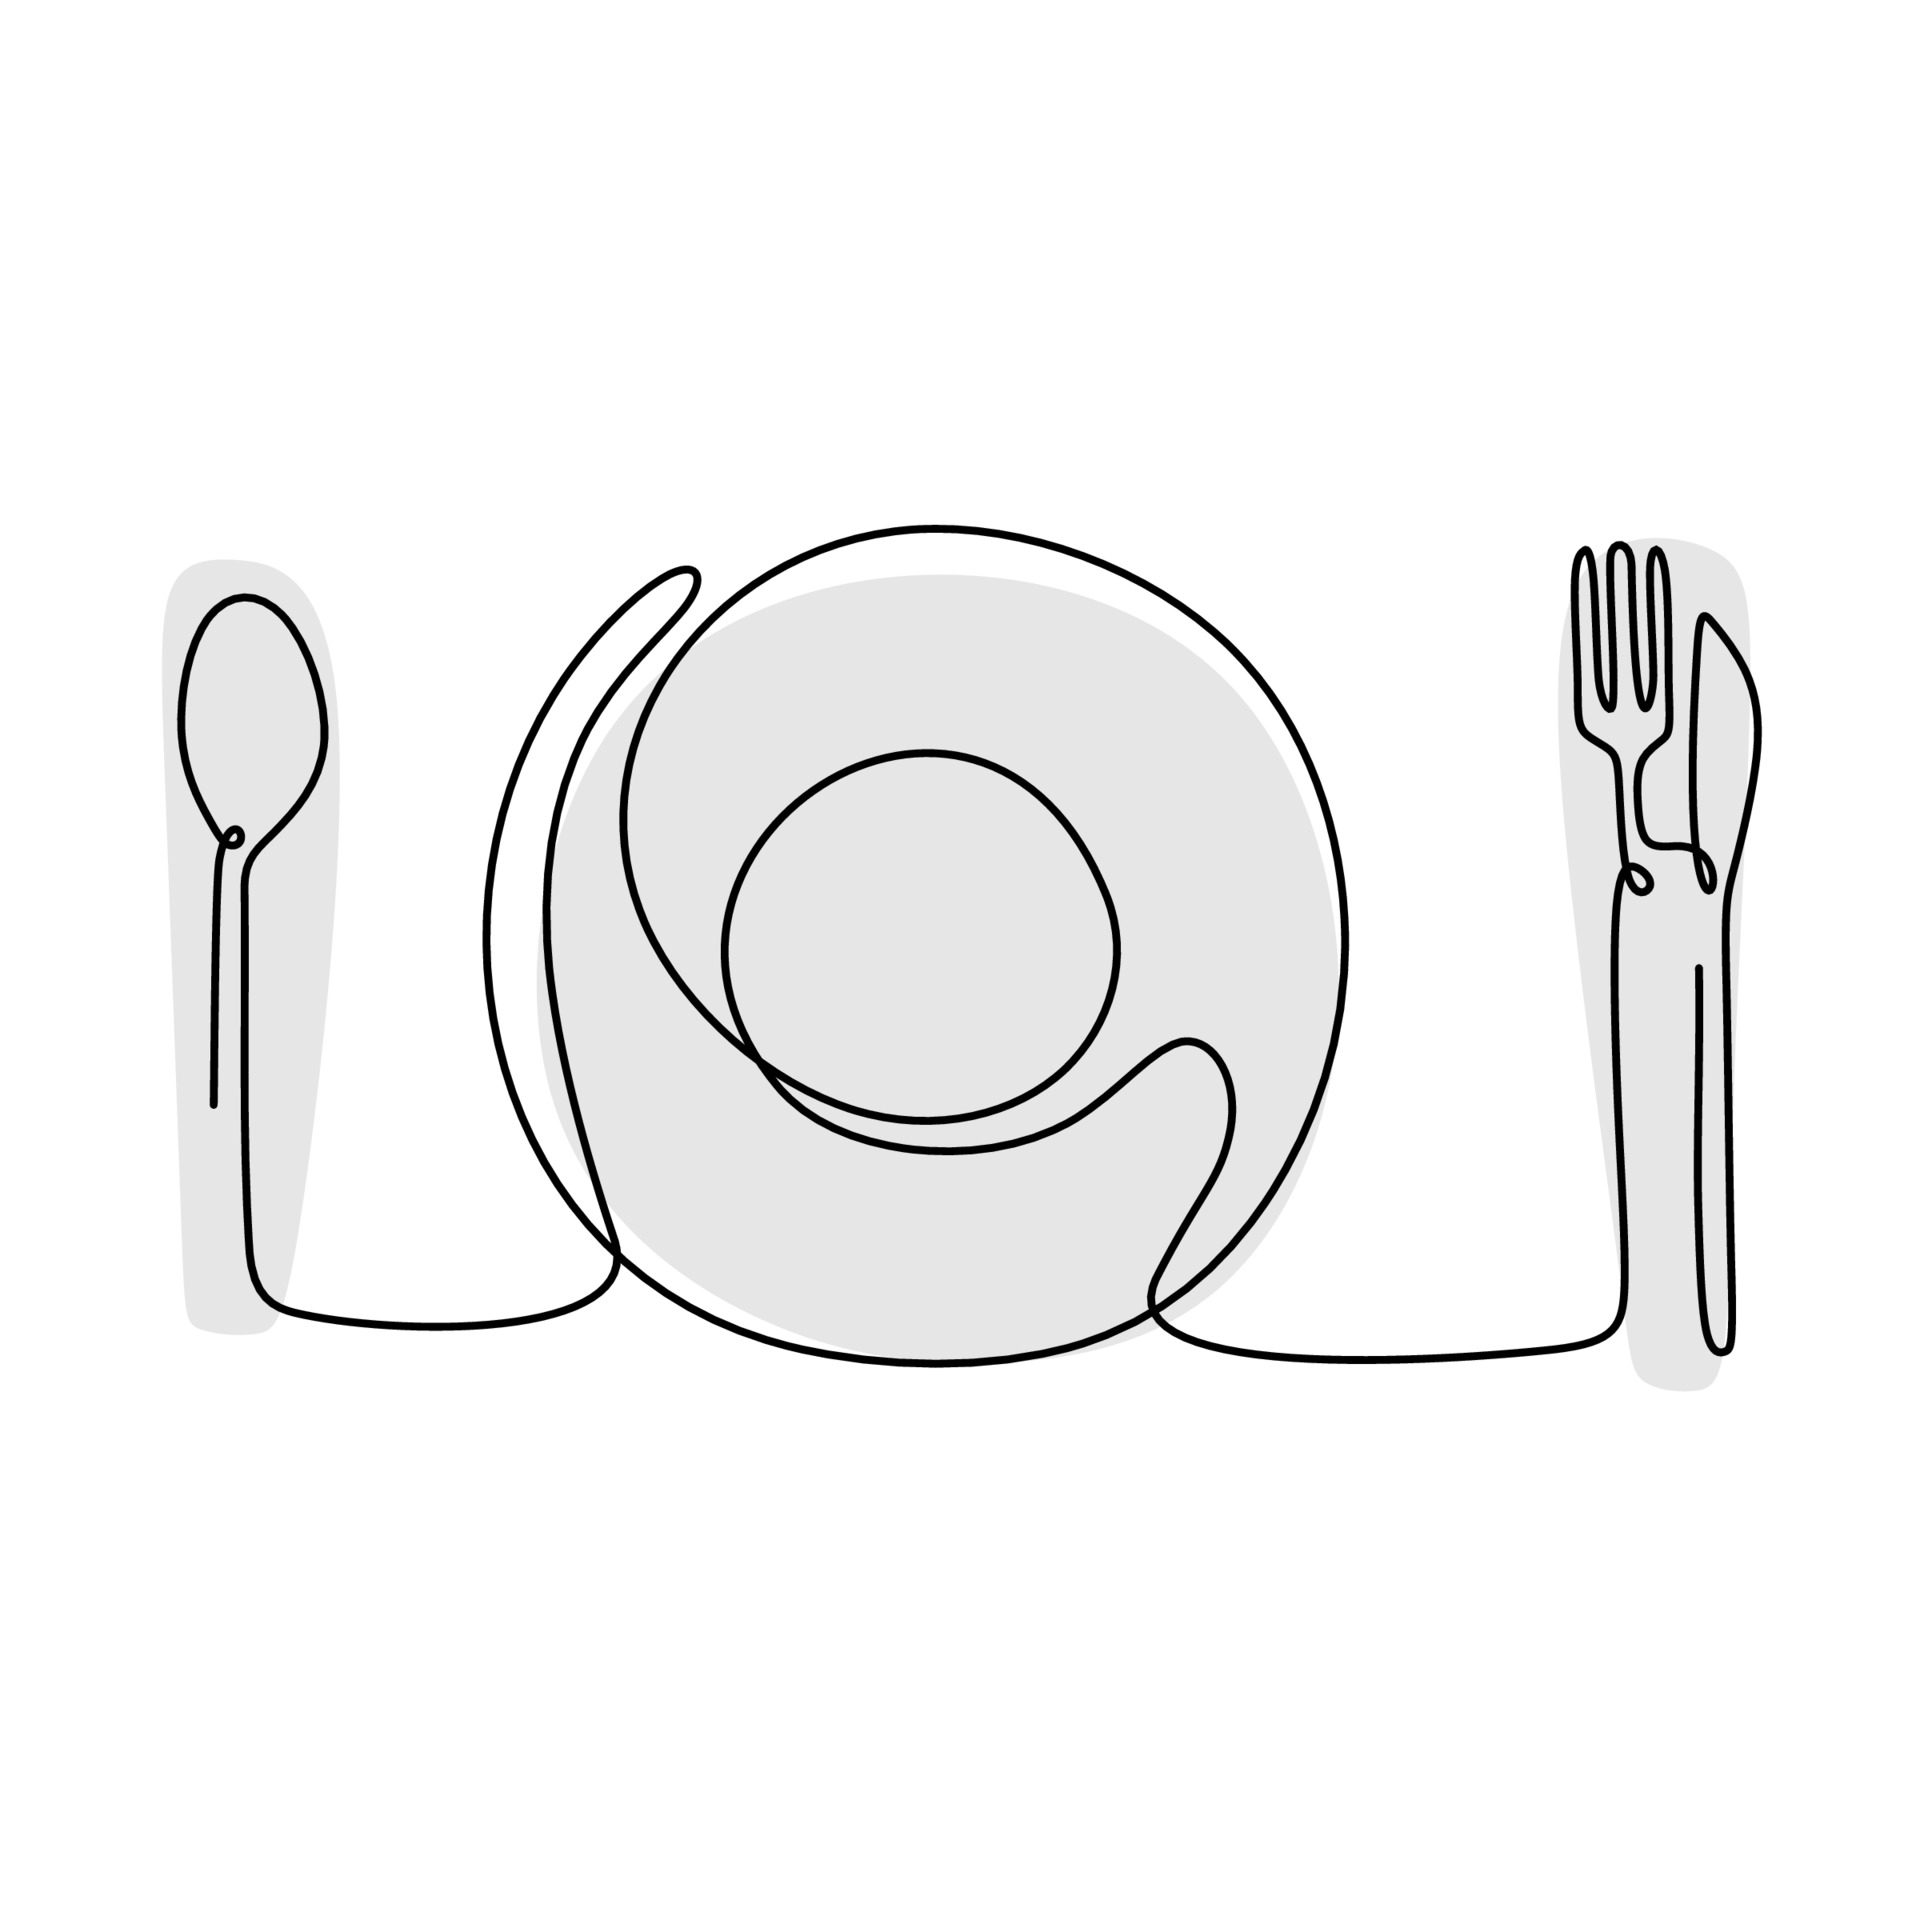 line drawing of plate, knife and fork. Continuous one hand drawn ...